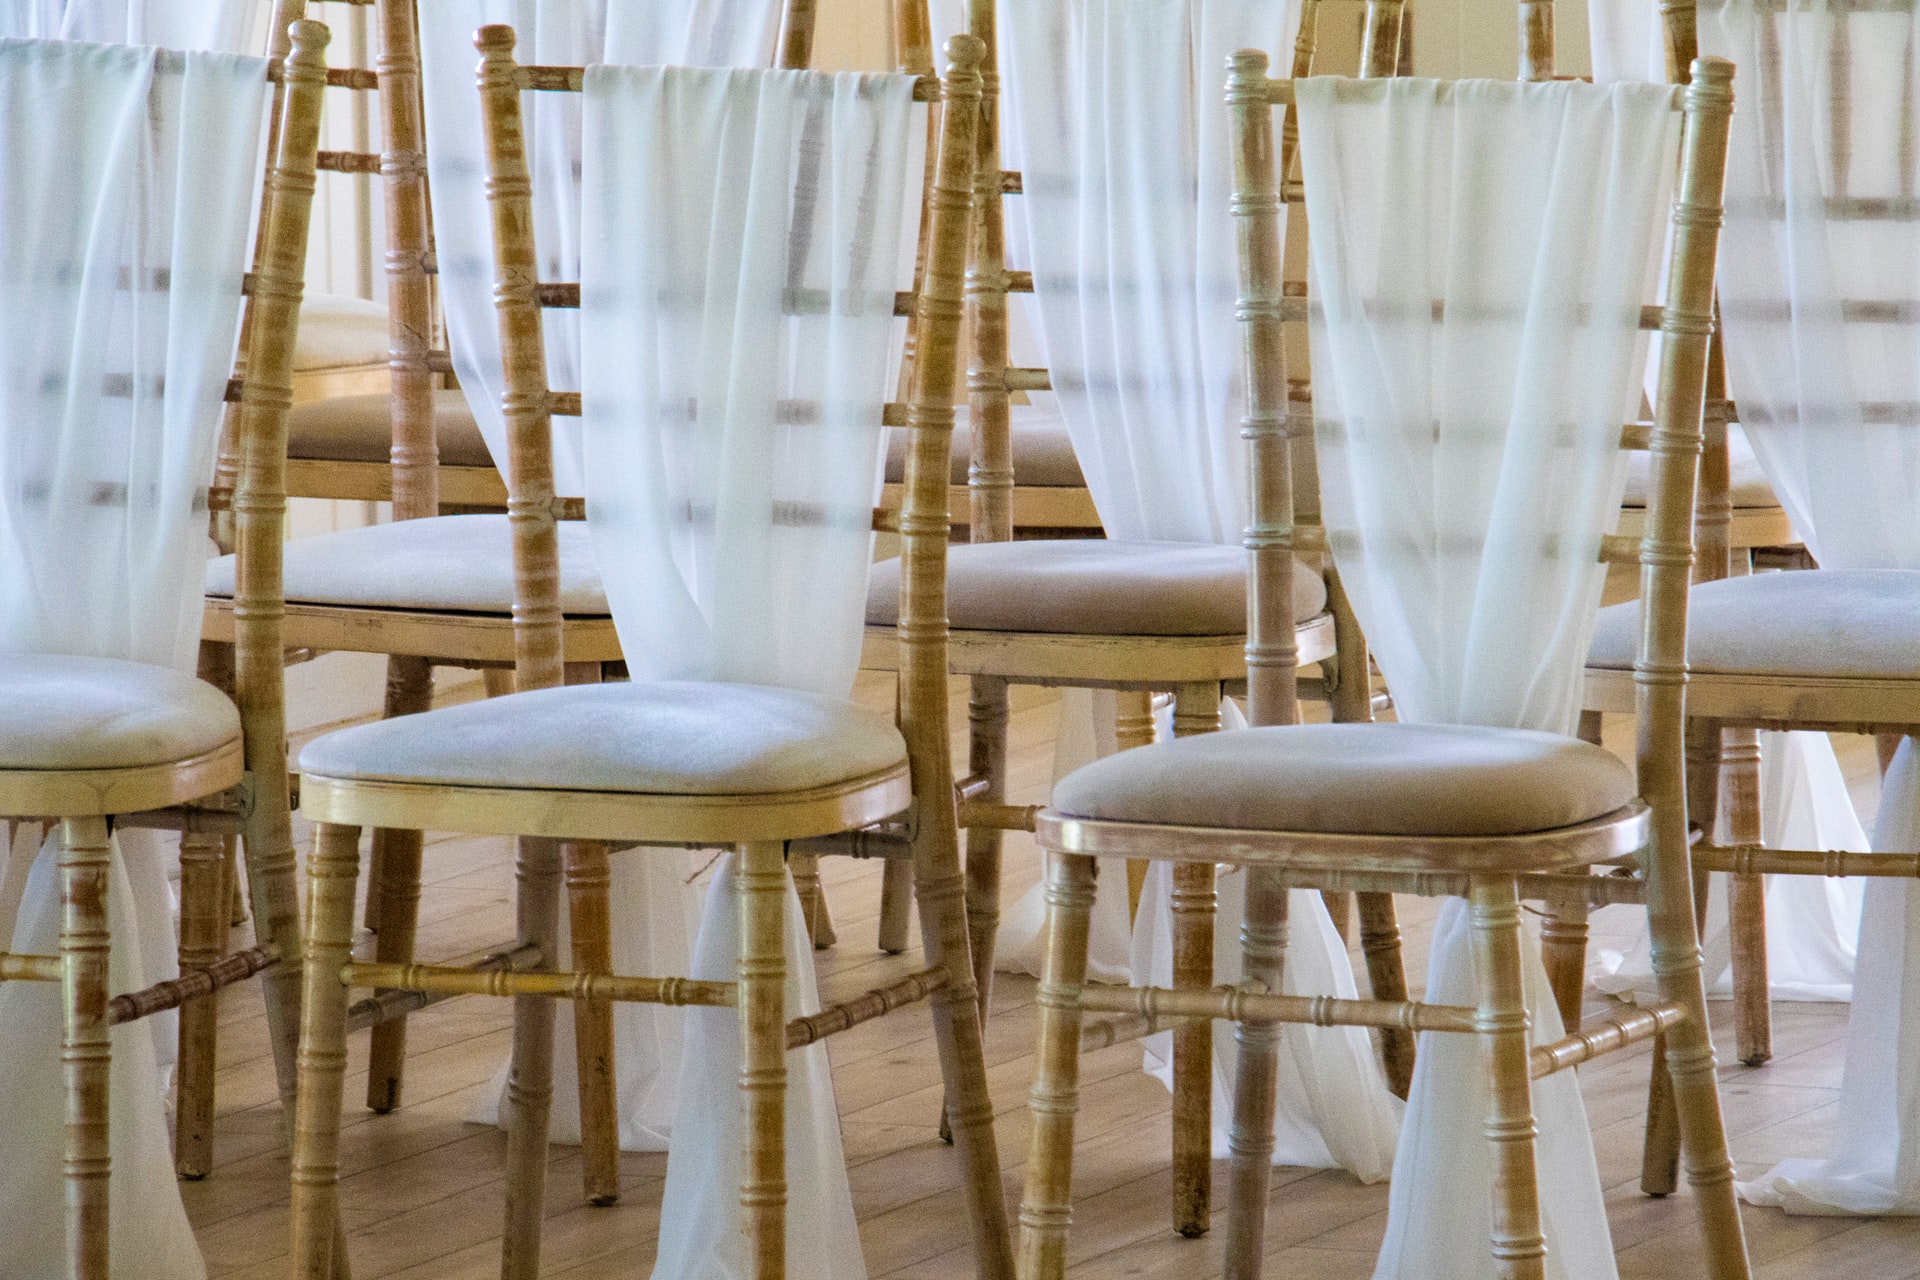 chairs with wedding decorations